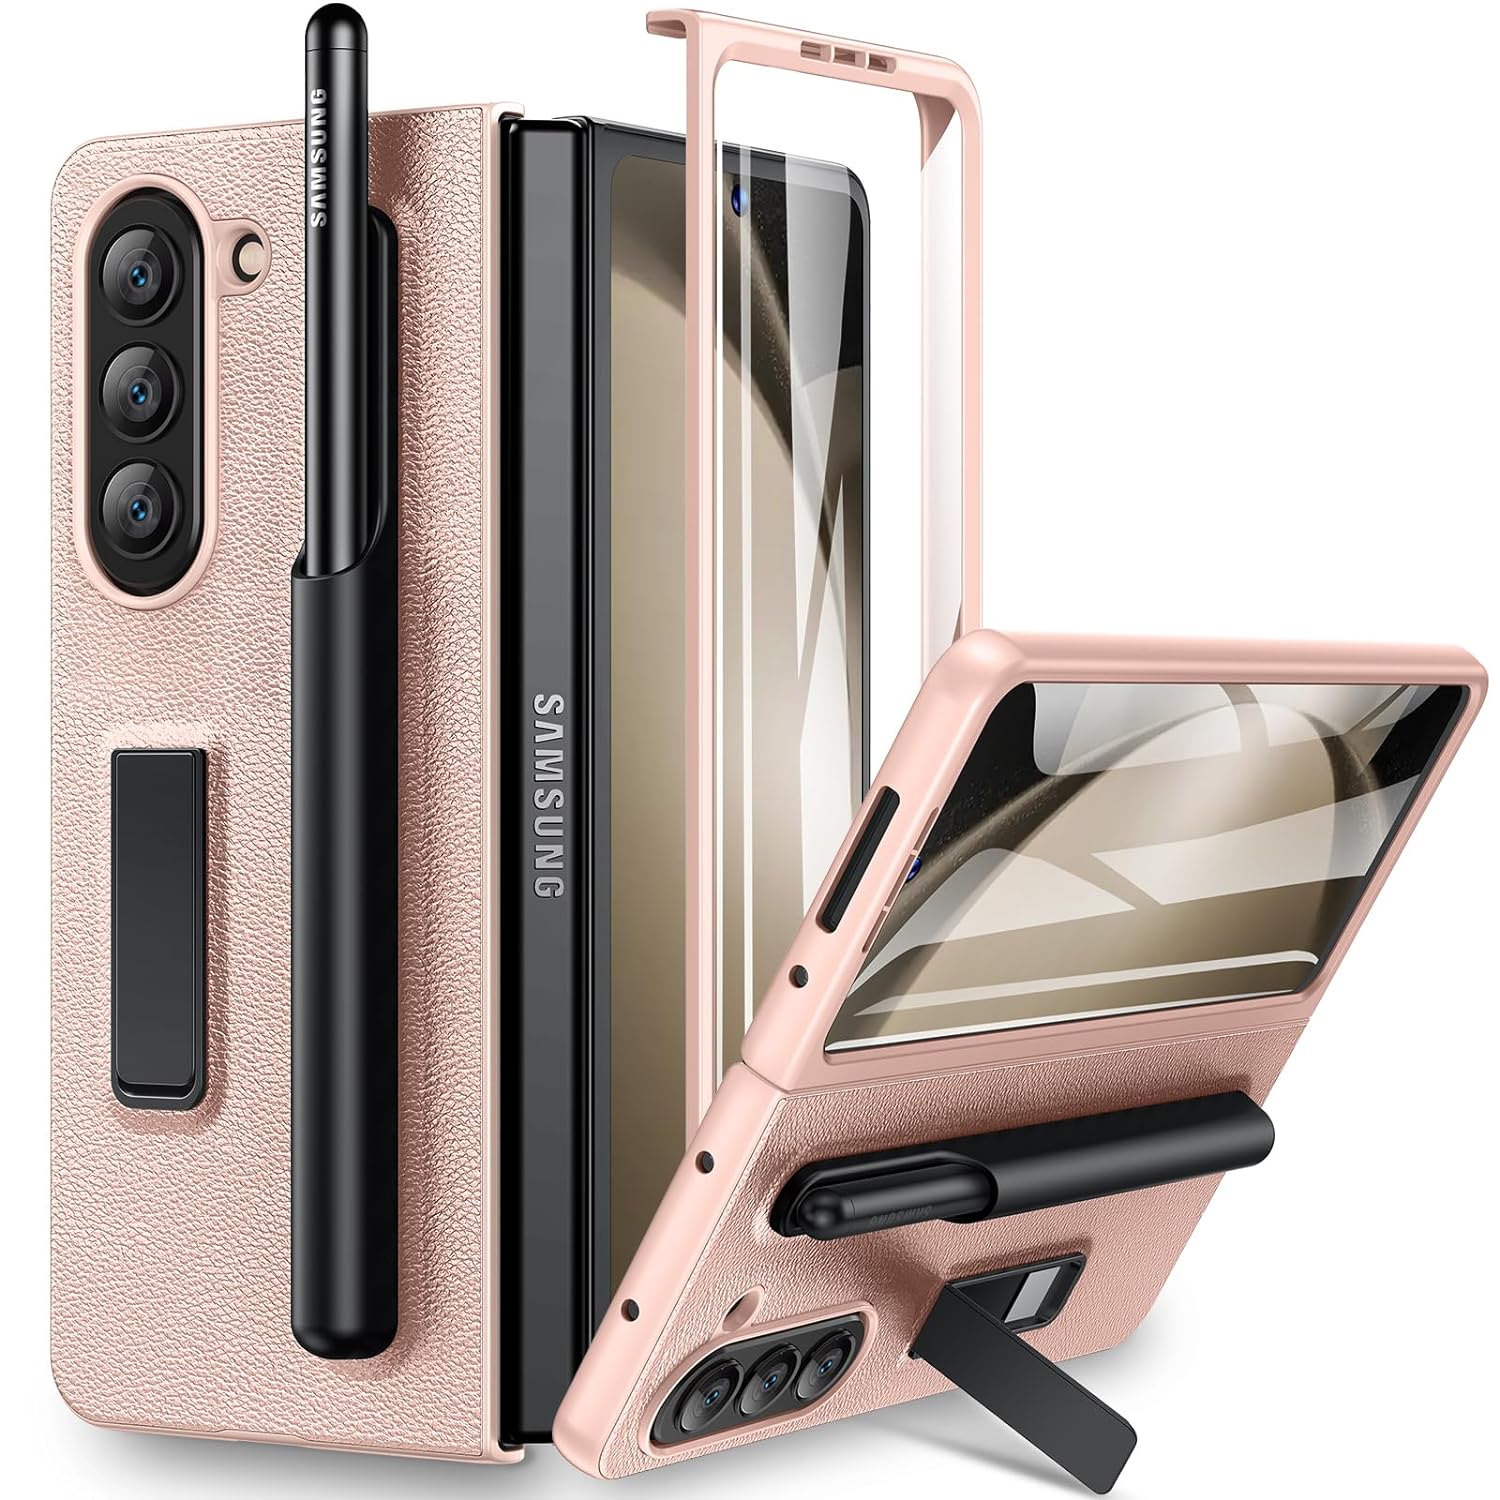 Maxdara for Samsung Galaxy Z Fold Case with S Pen Slot, Z Fold Case with Front Screen Protector Built-in Kickstand PU Leather Protective Case for Samsung Fold (Rose Gold)